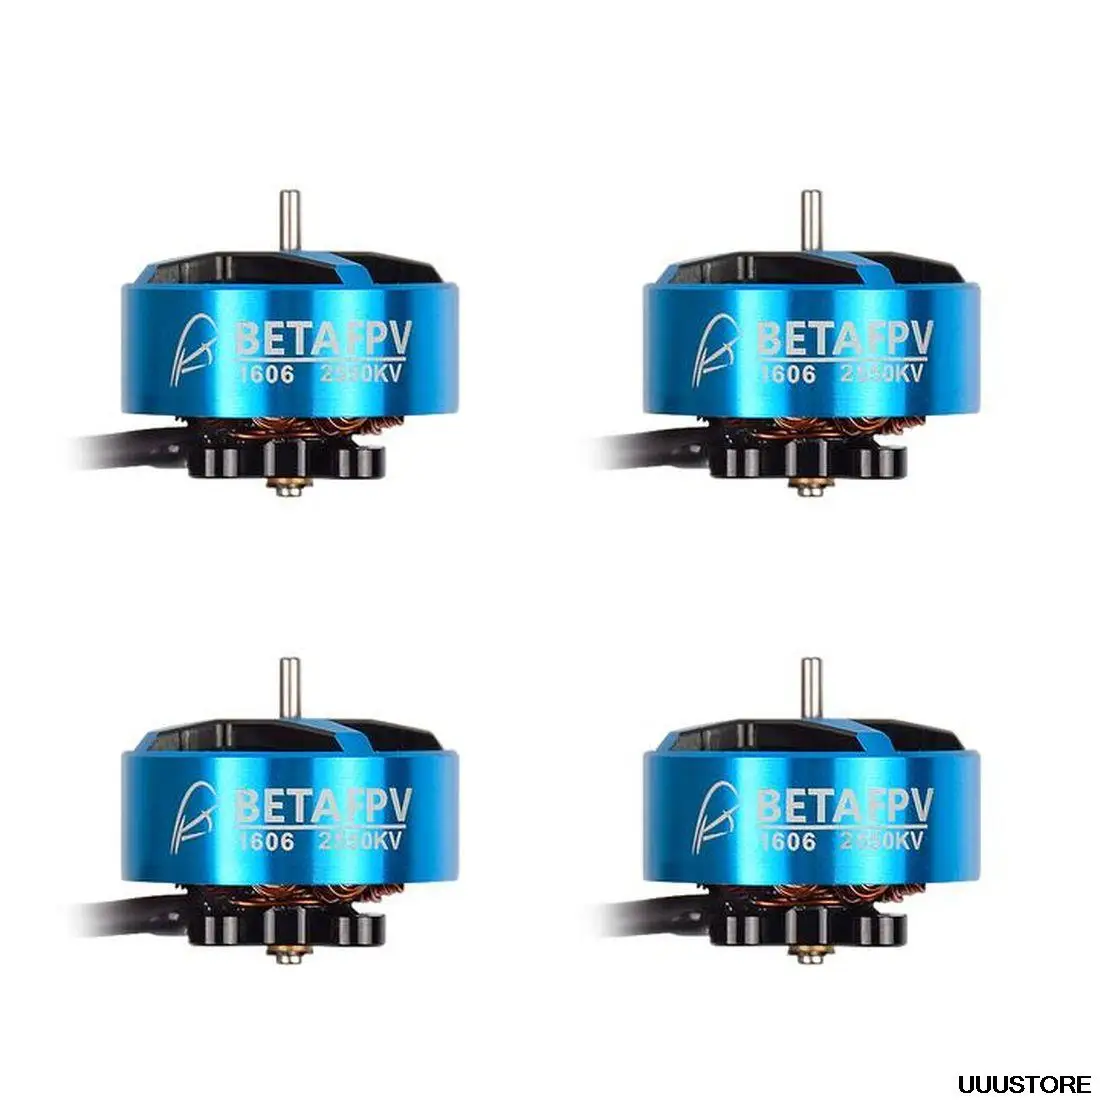 Newest BETAFPV 1606 2550KV 4S / 1550KV 6S Brushless Motors for TWIG ET5/TWIG Mutant 4'' and X-Knight 4-5 inch FPV Racing Drone 2